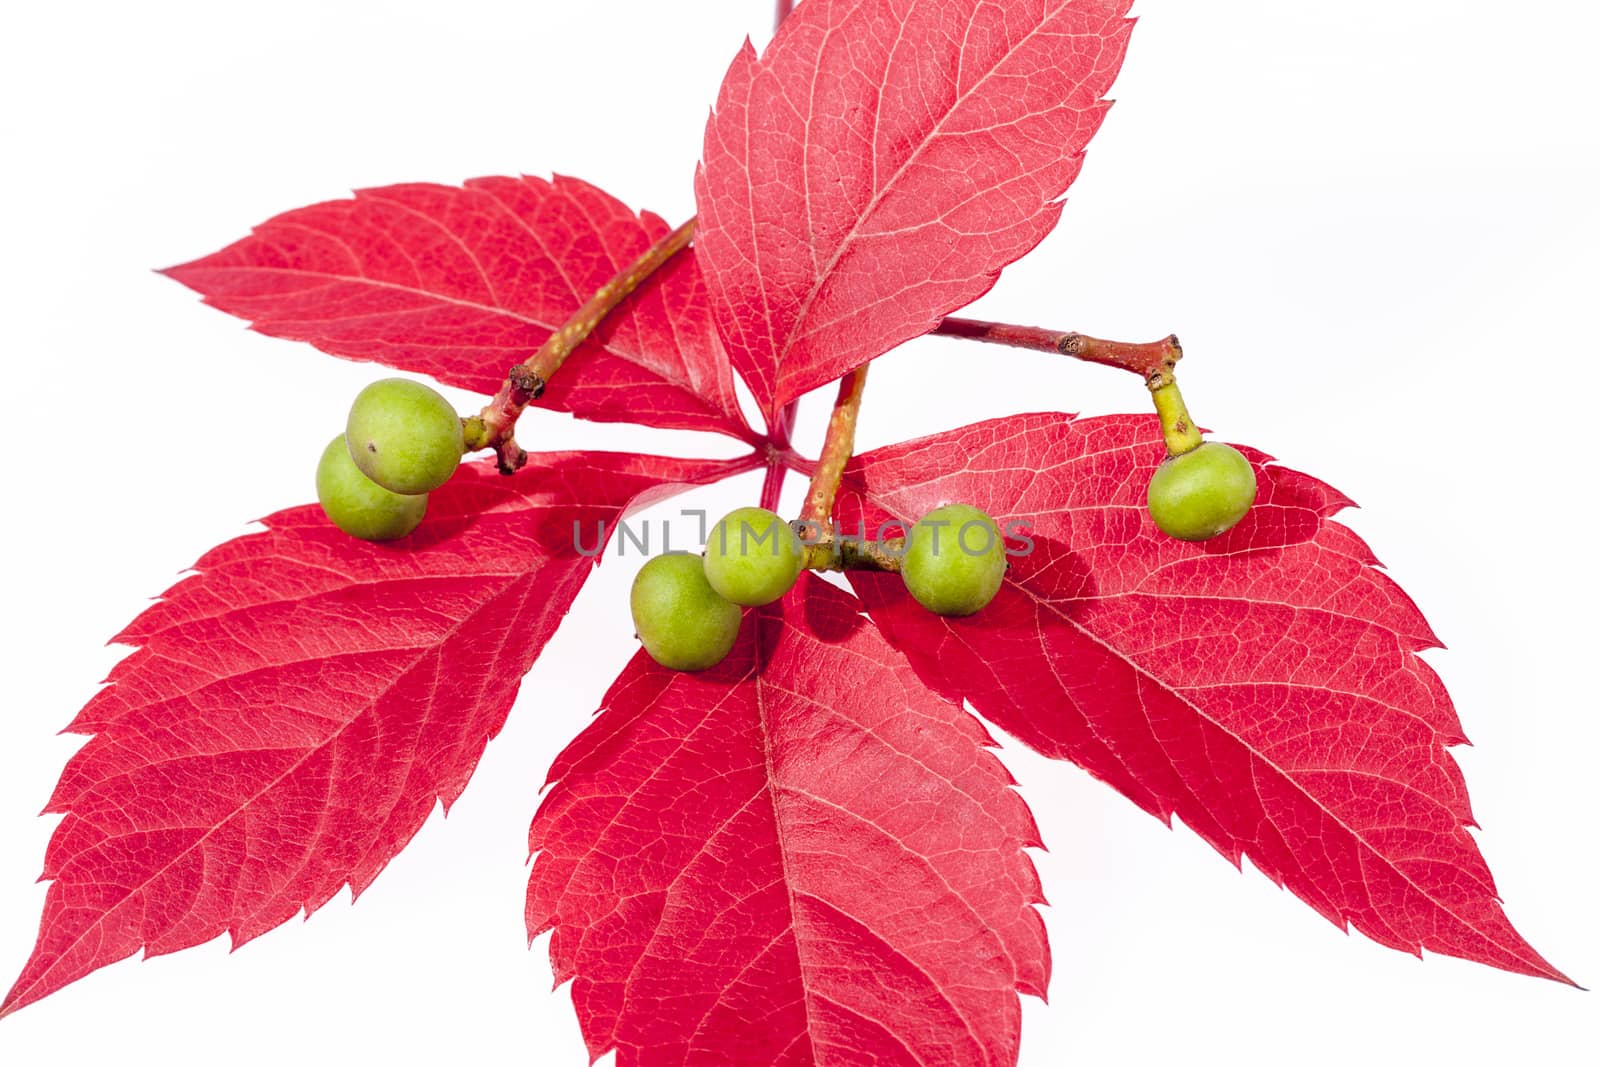 autumn colorfu l leaves of parthenocissus with green berry  isolated  on white background.